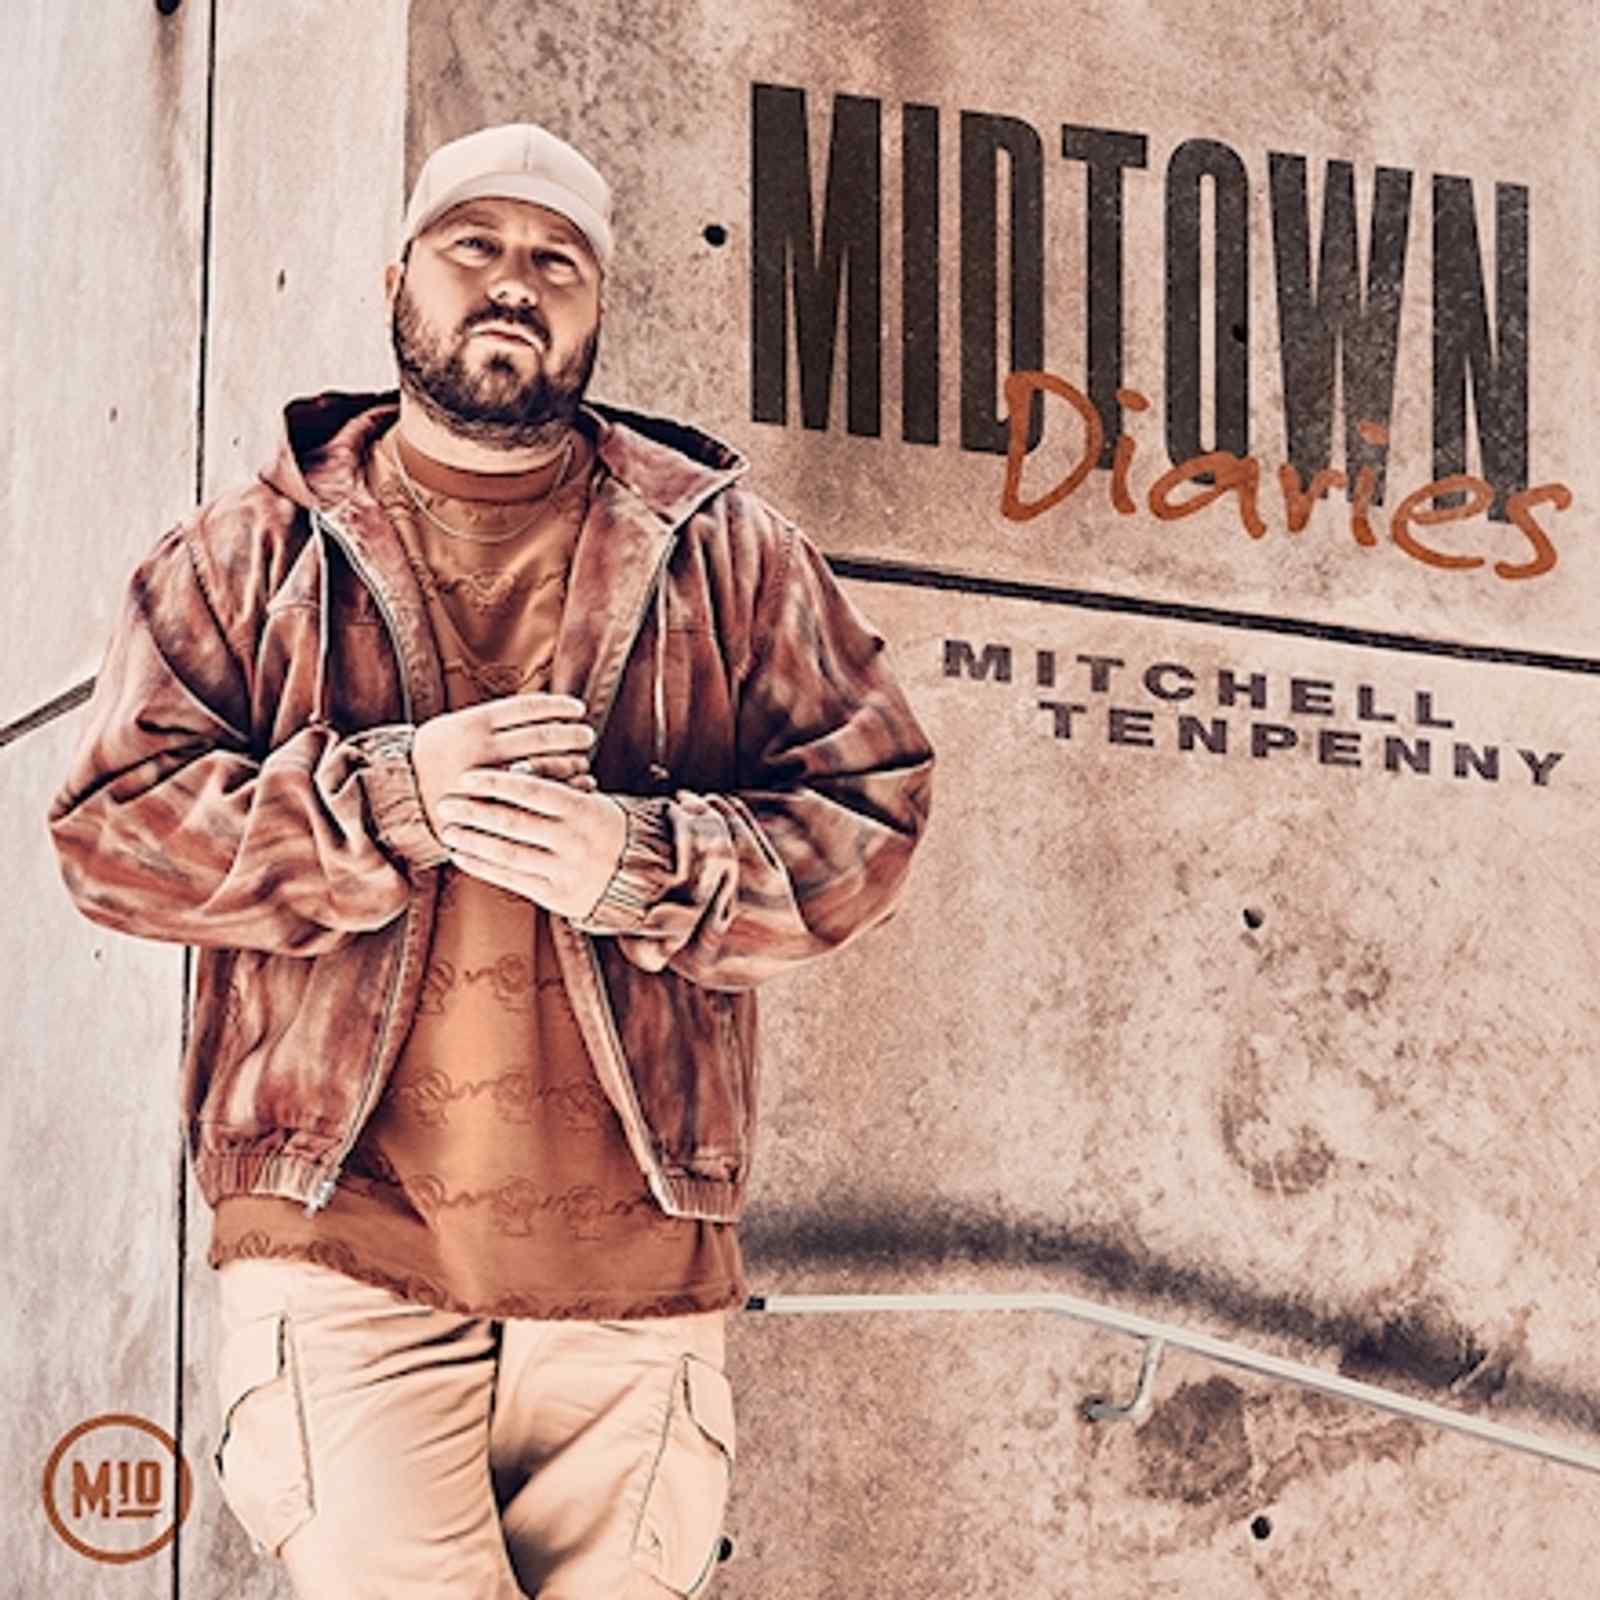 Midtown Diaries by Mitchell Tenpenny